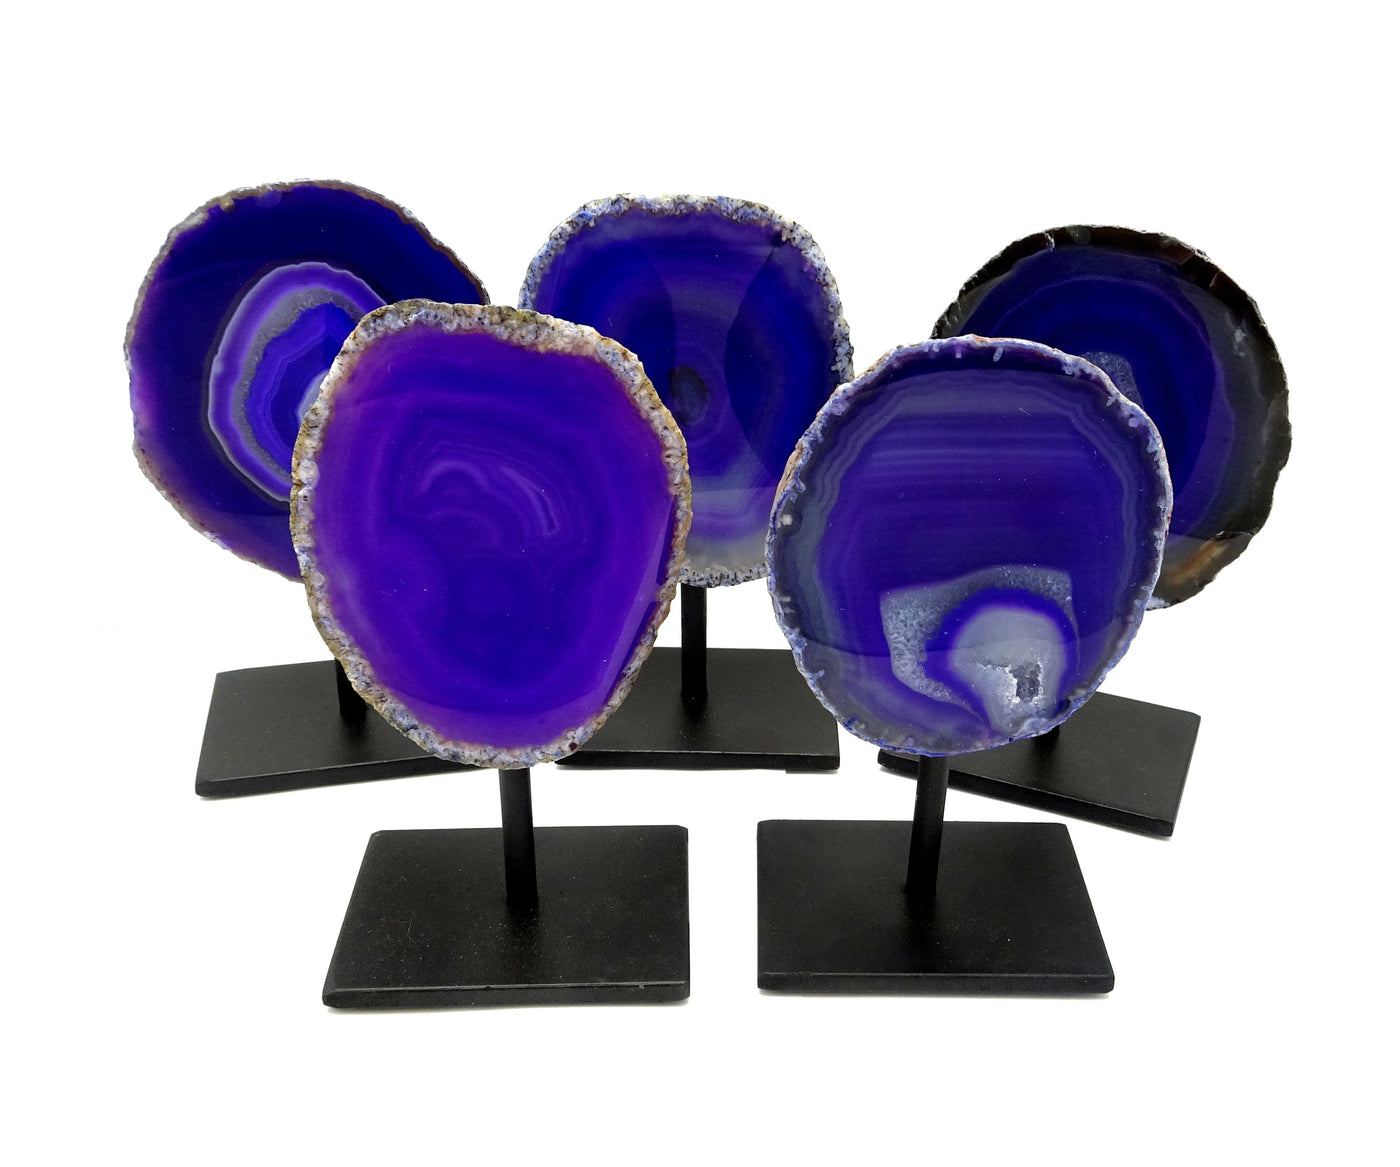 Five front facing agate geode on metal base with a white background.